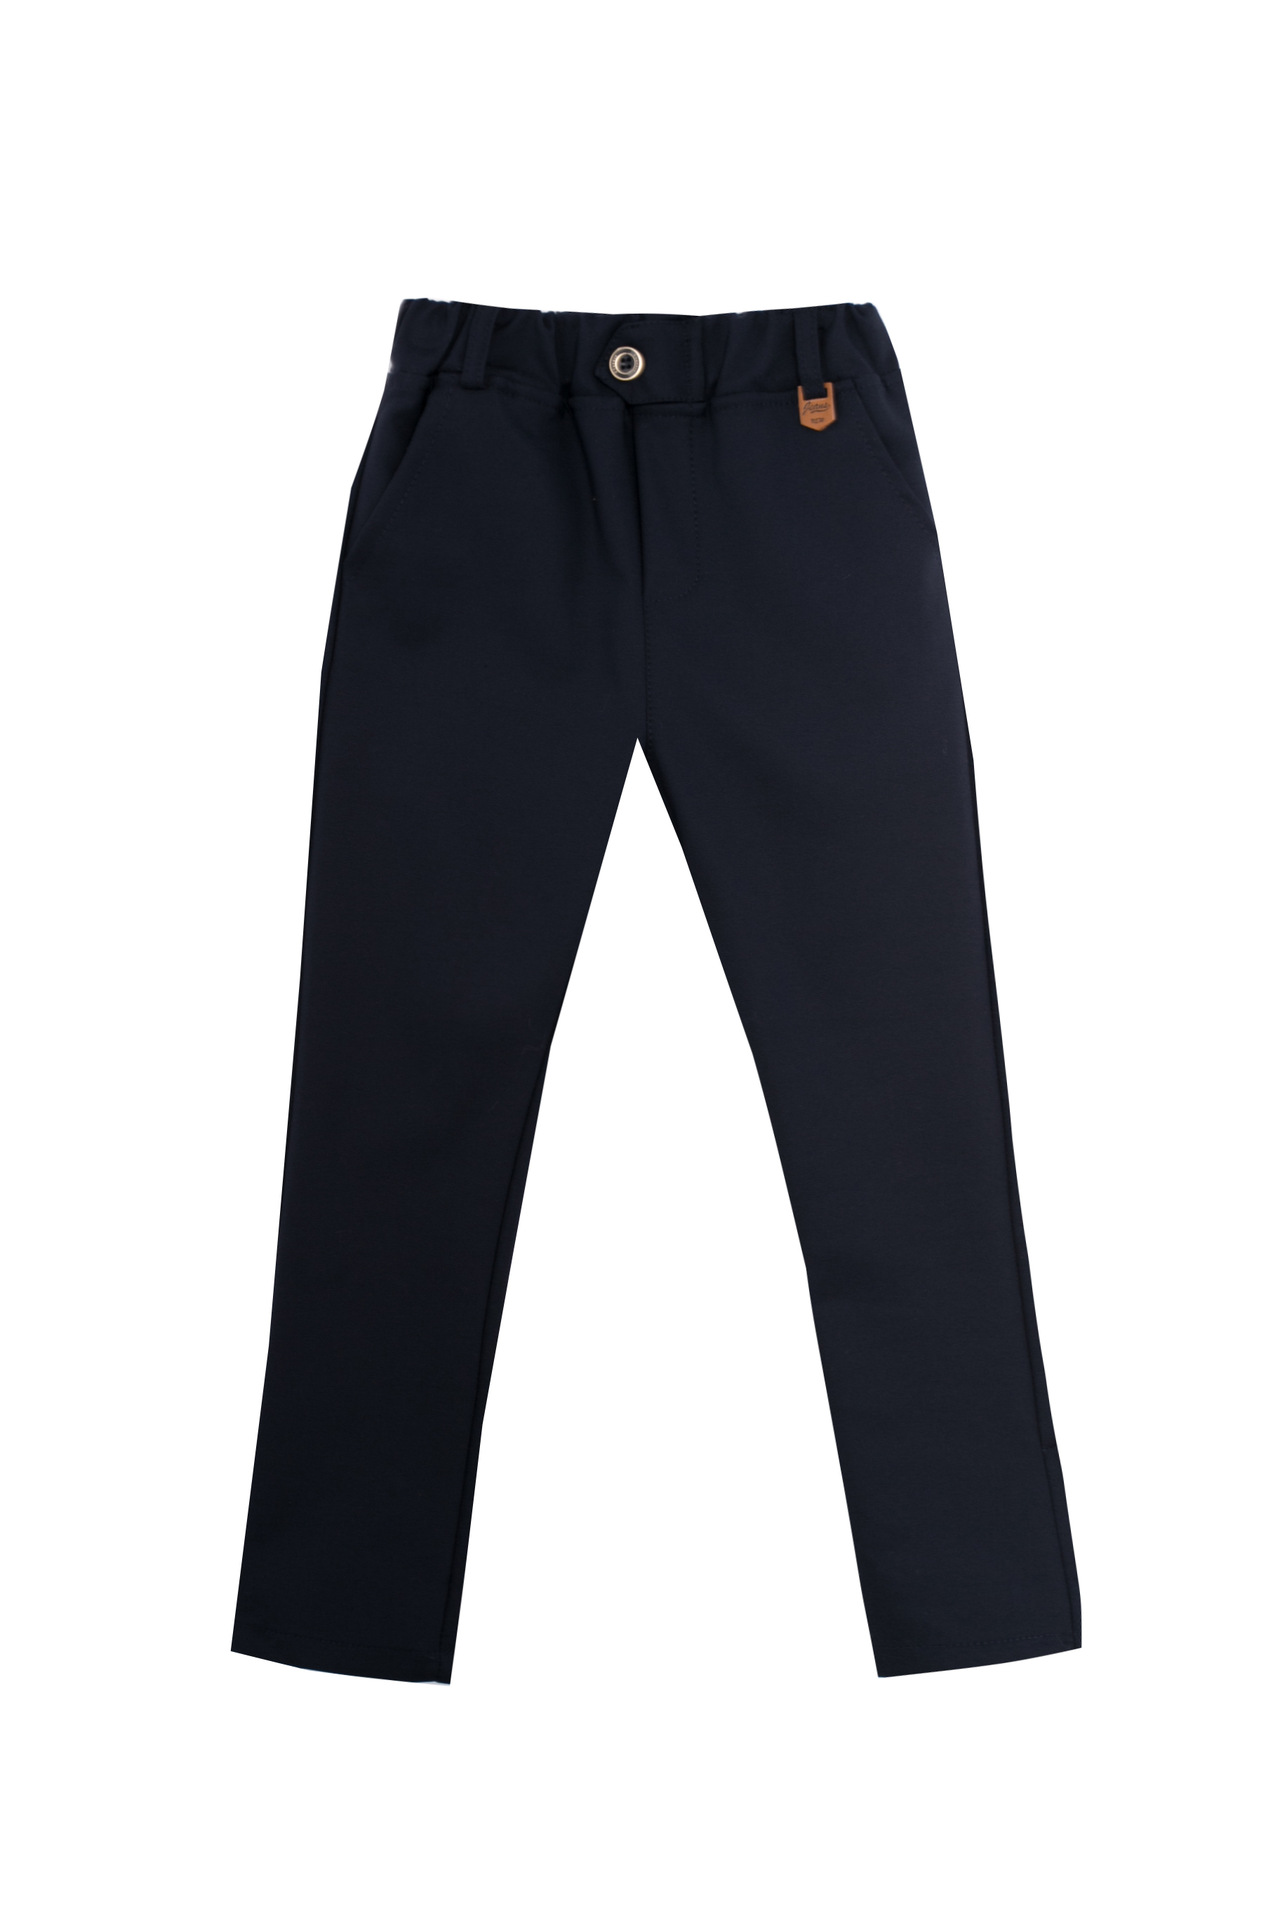 Liberty Uniform 600MNV Men's Trousers Stain Resistant Navy – Tactical365